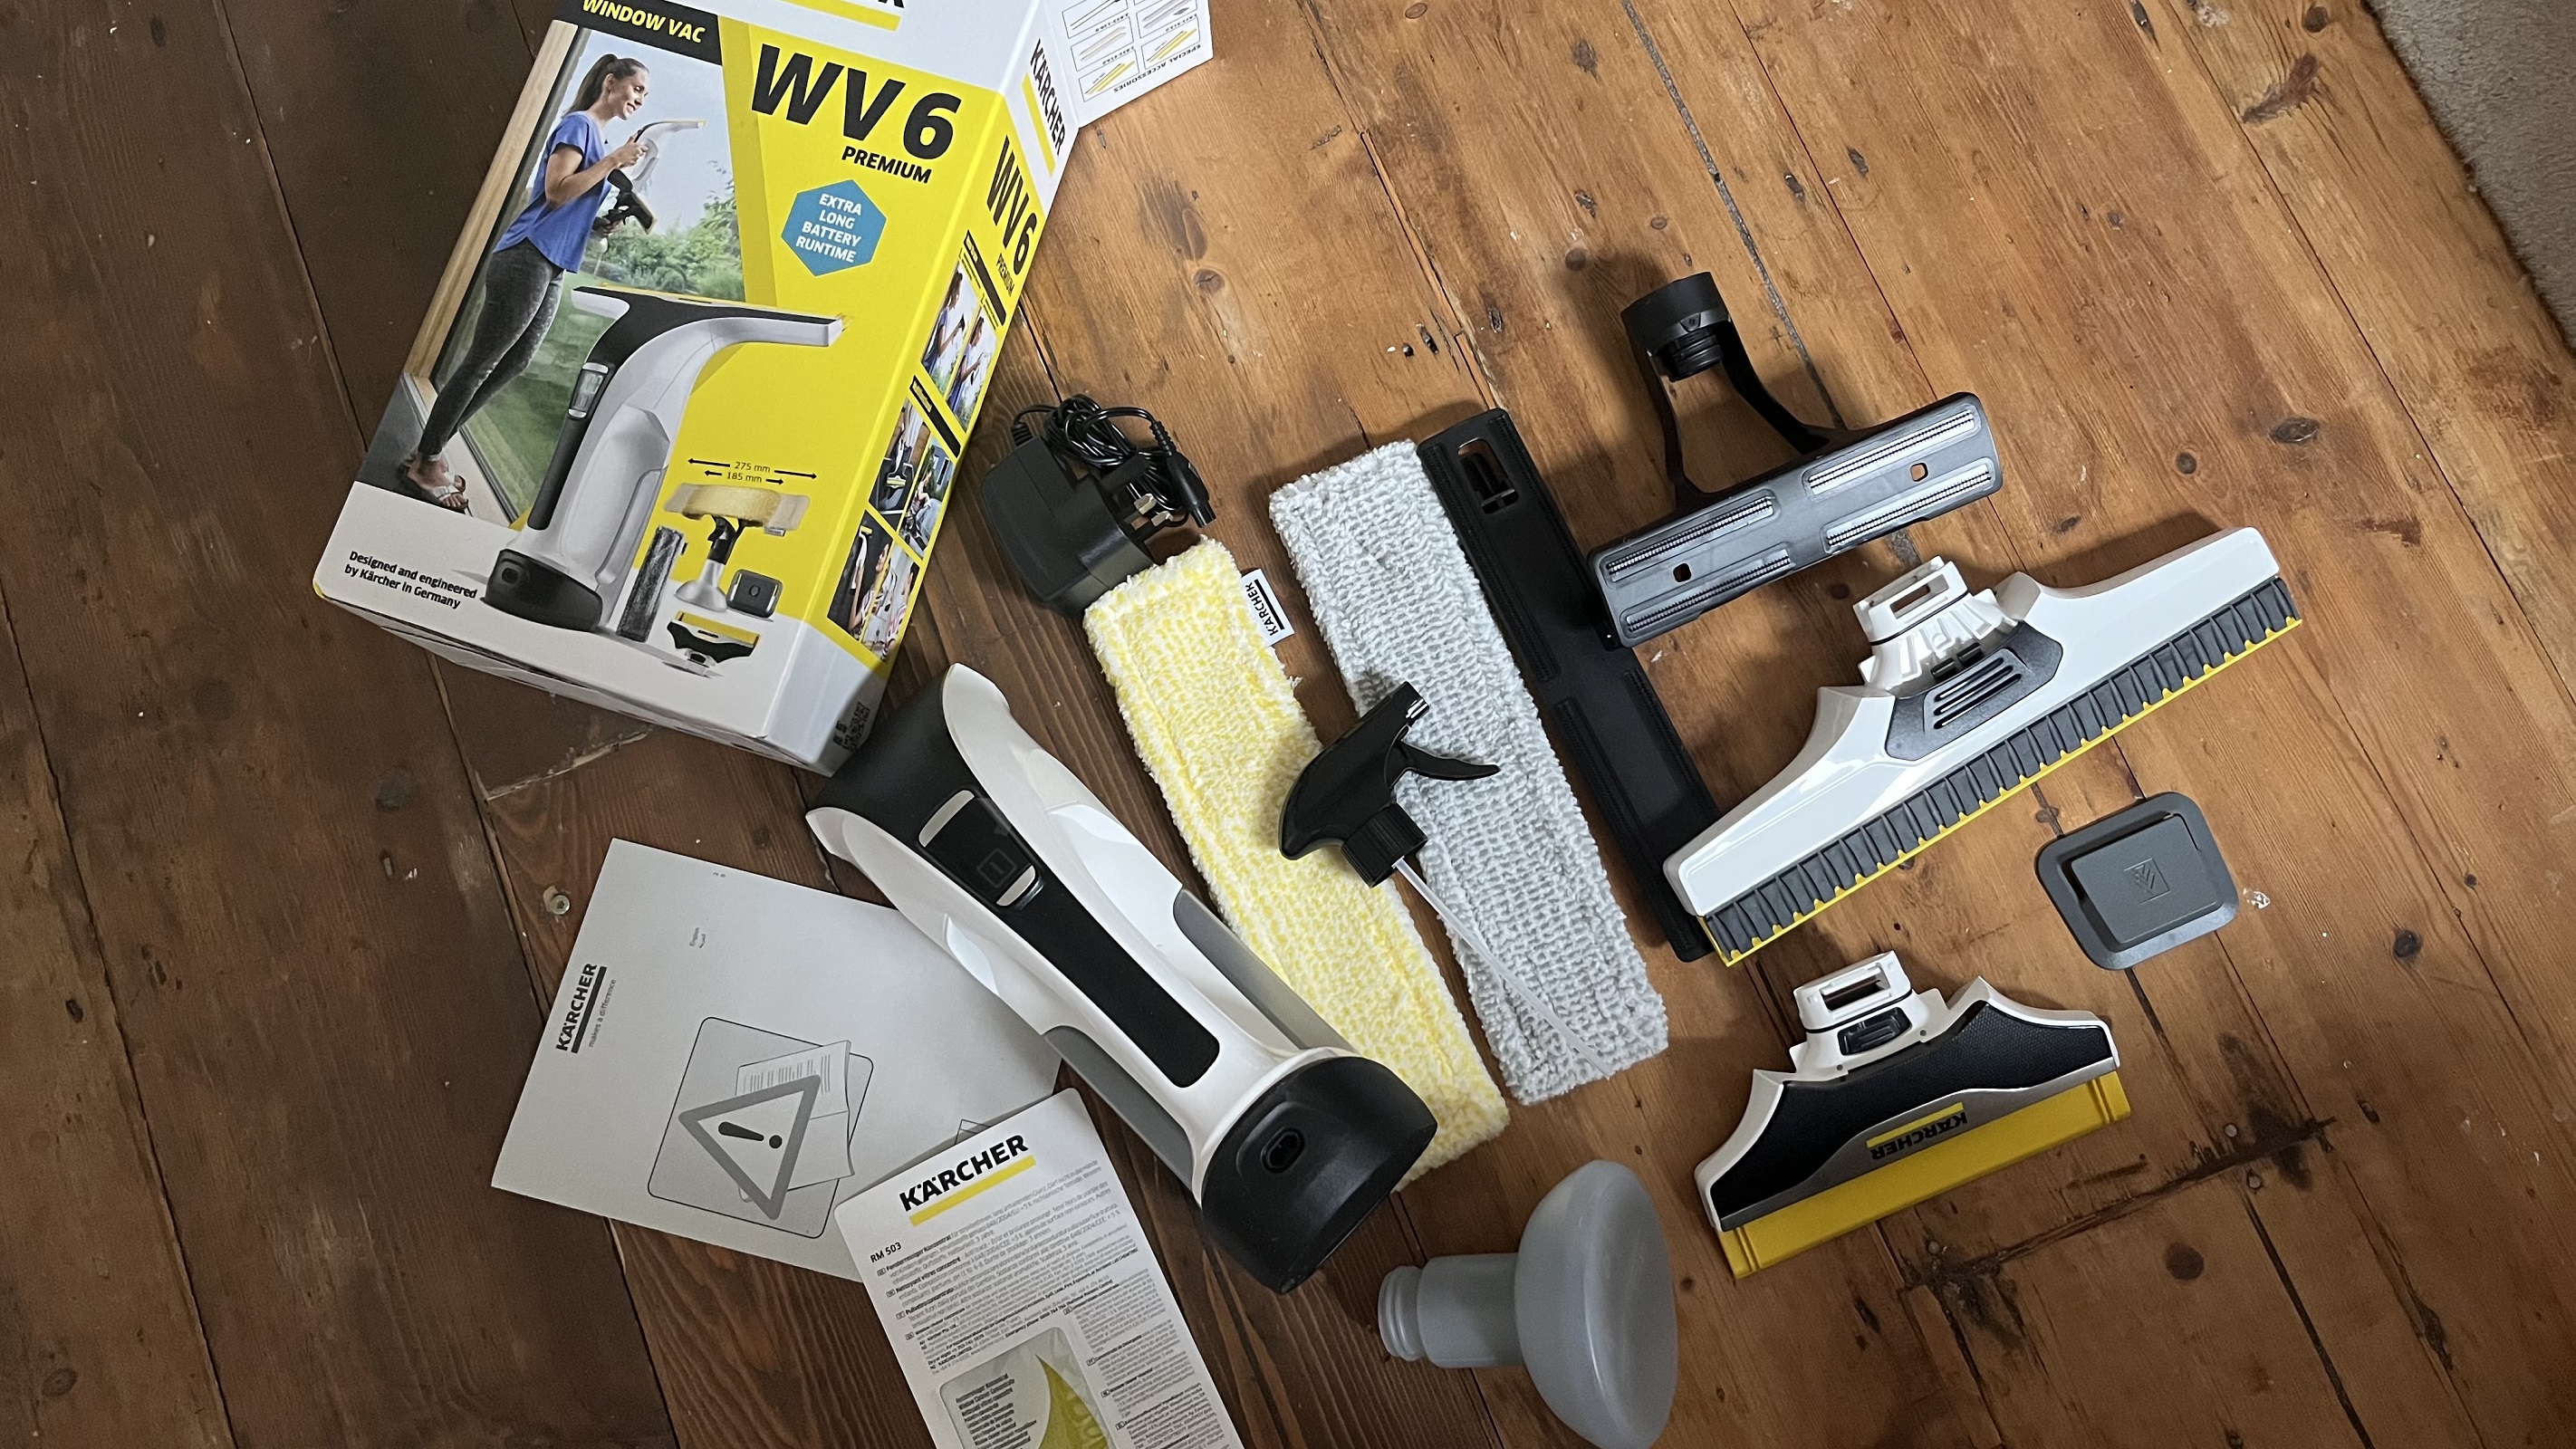 Karcher Window Vac WV 6 Premium review: great for windows and more